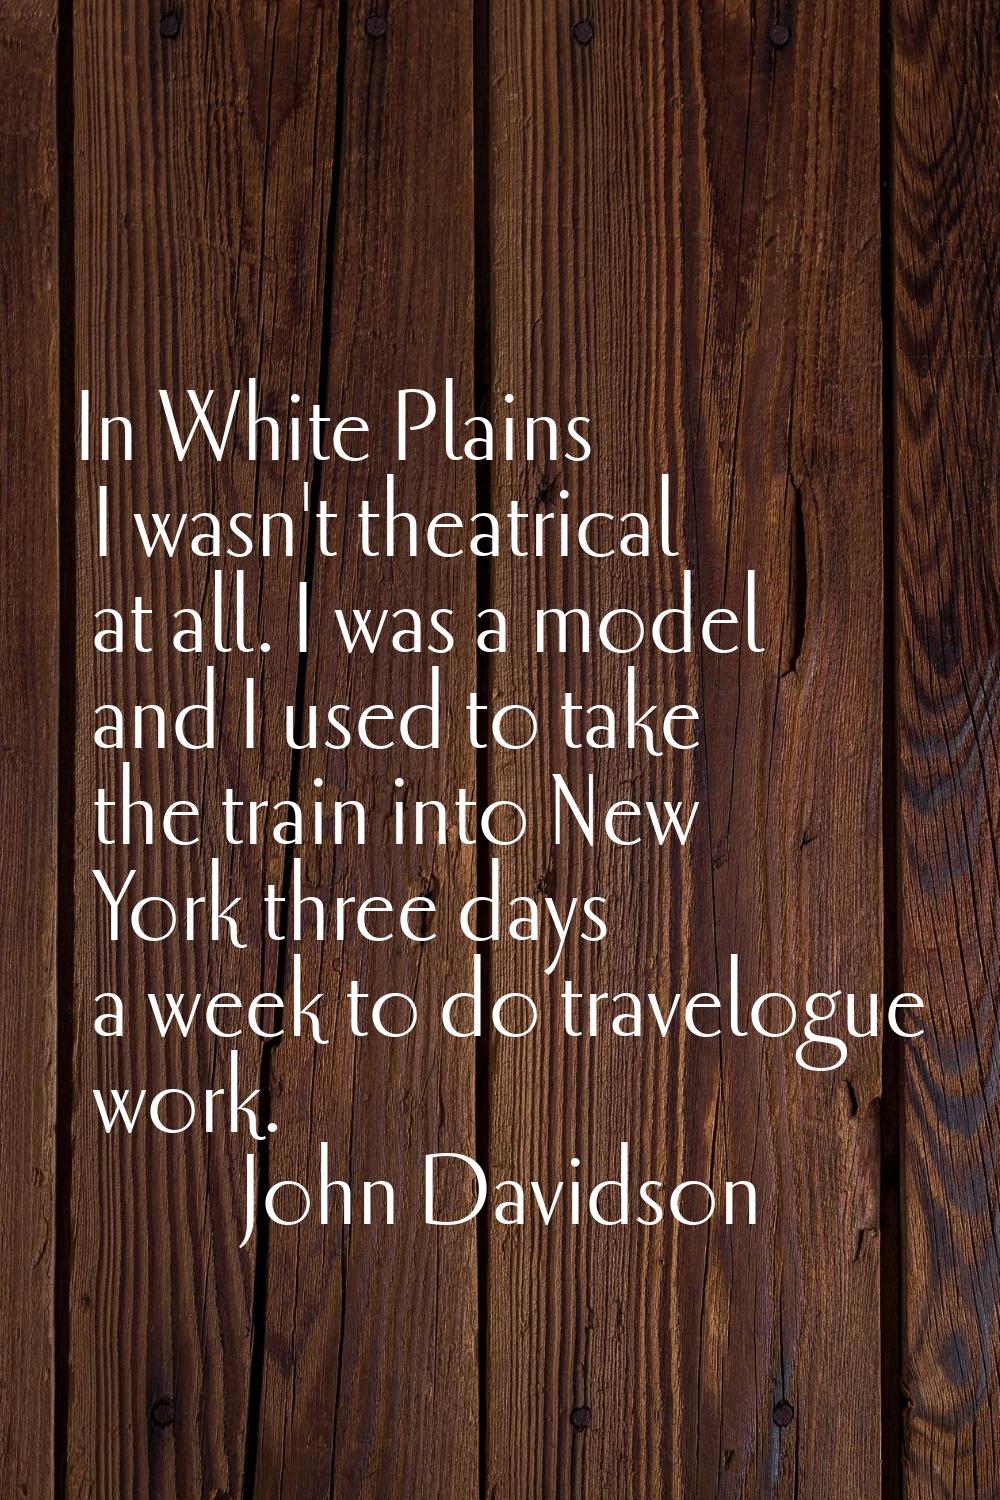 In White Plains I wasn't theatrical at all. I was a model and I used to take the train into New Yor